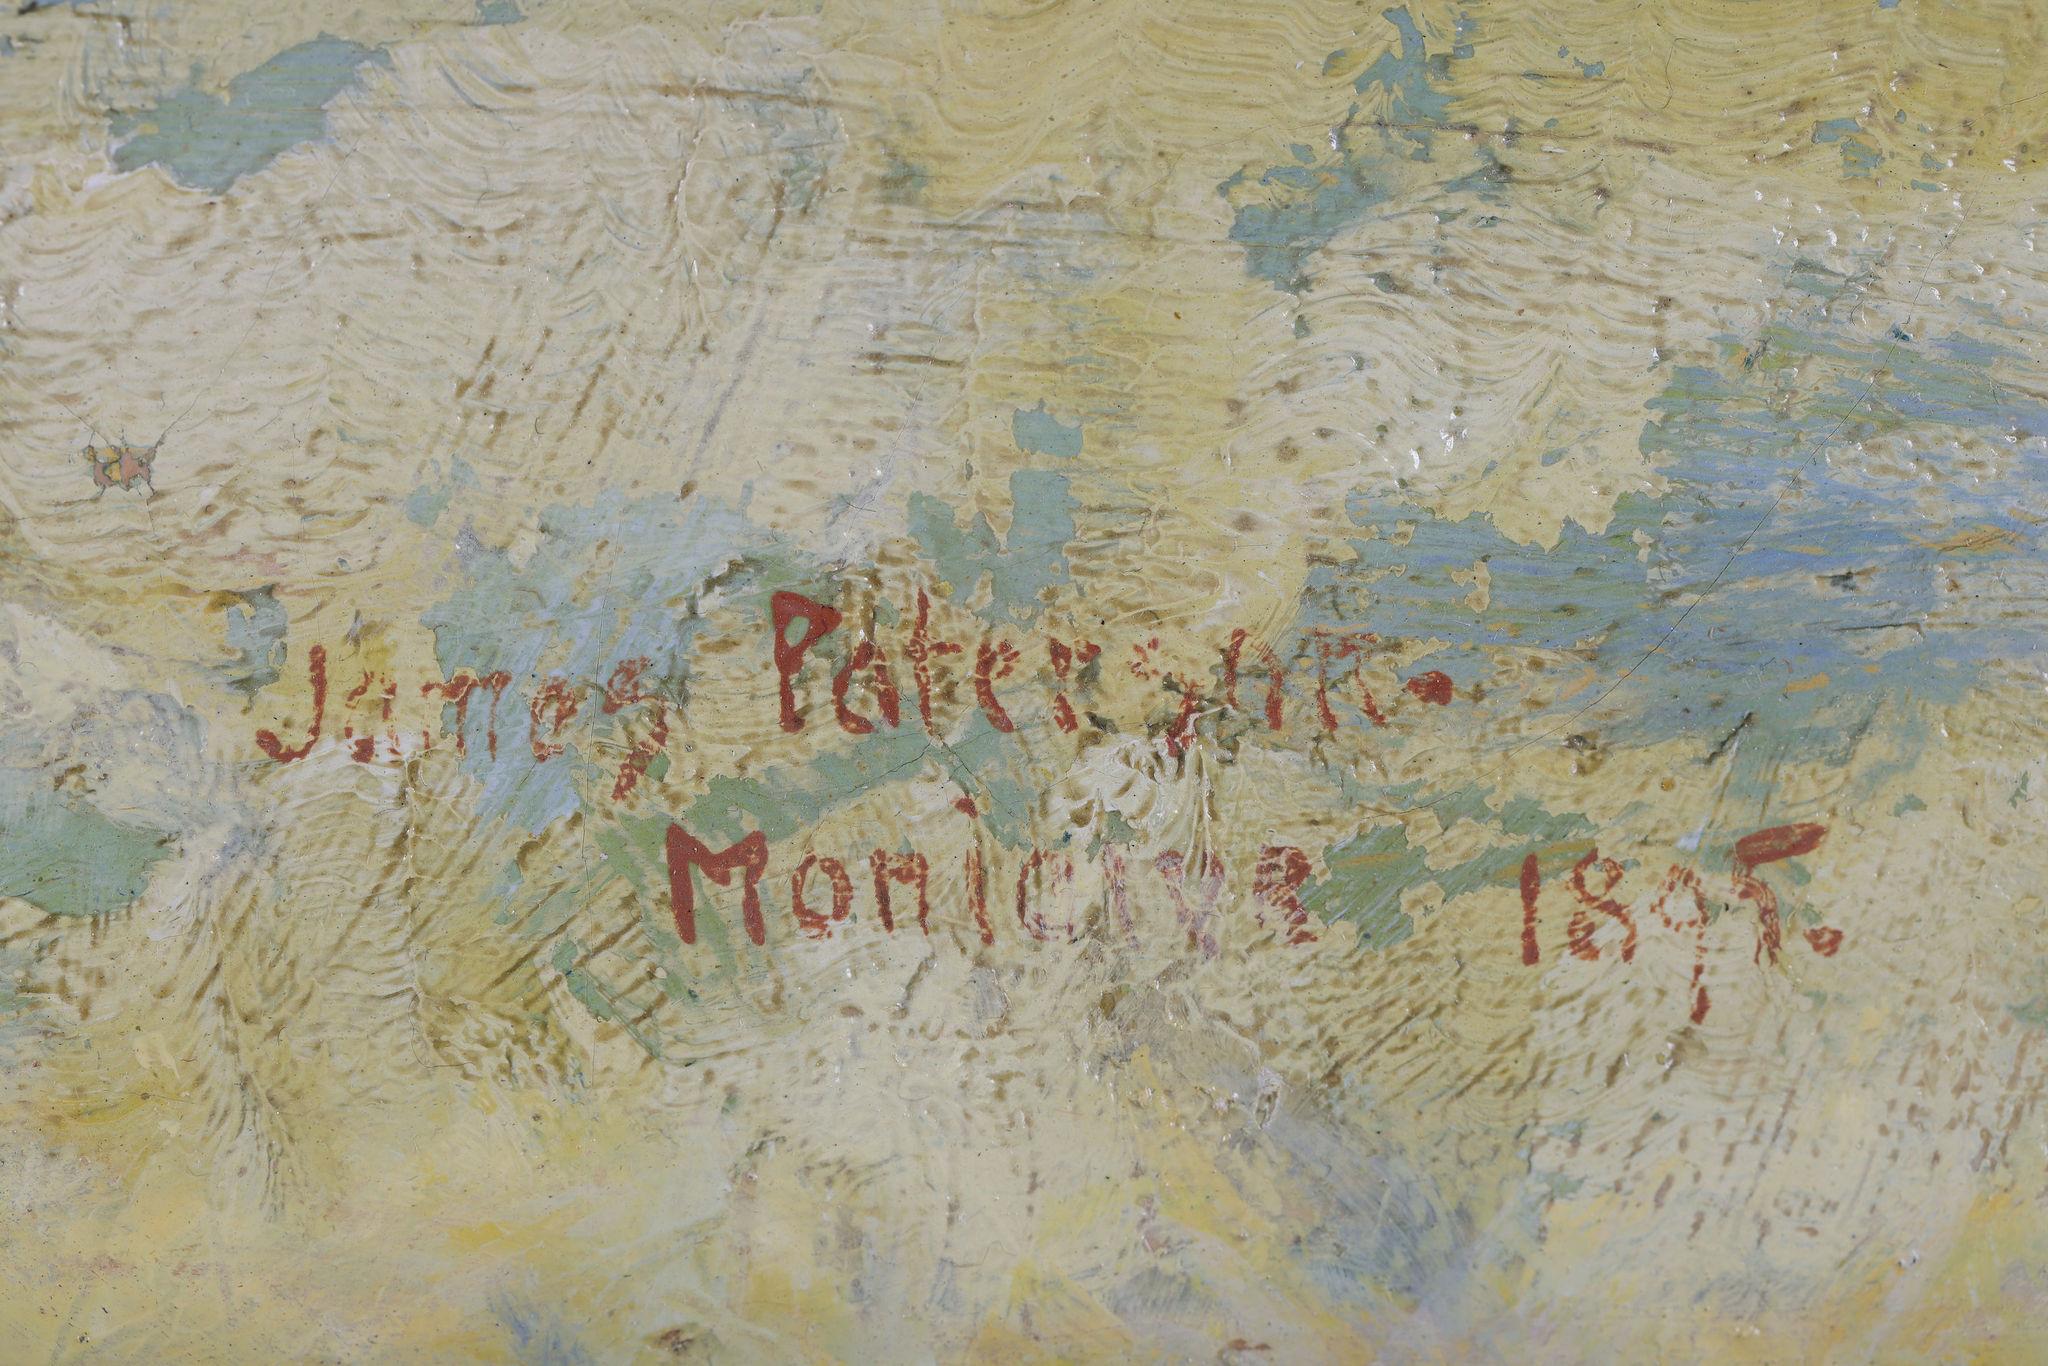 James Paterson
Signed and dated 1895

On the reverse signed James Paterson
176 Bath Street, Glasgow
Killniess, Moniaive, Scotland on the reverse

Canvas Size: 21 x 26